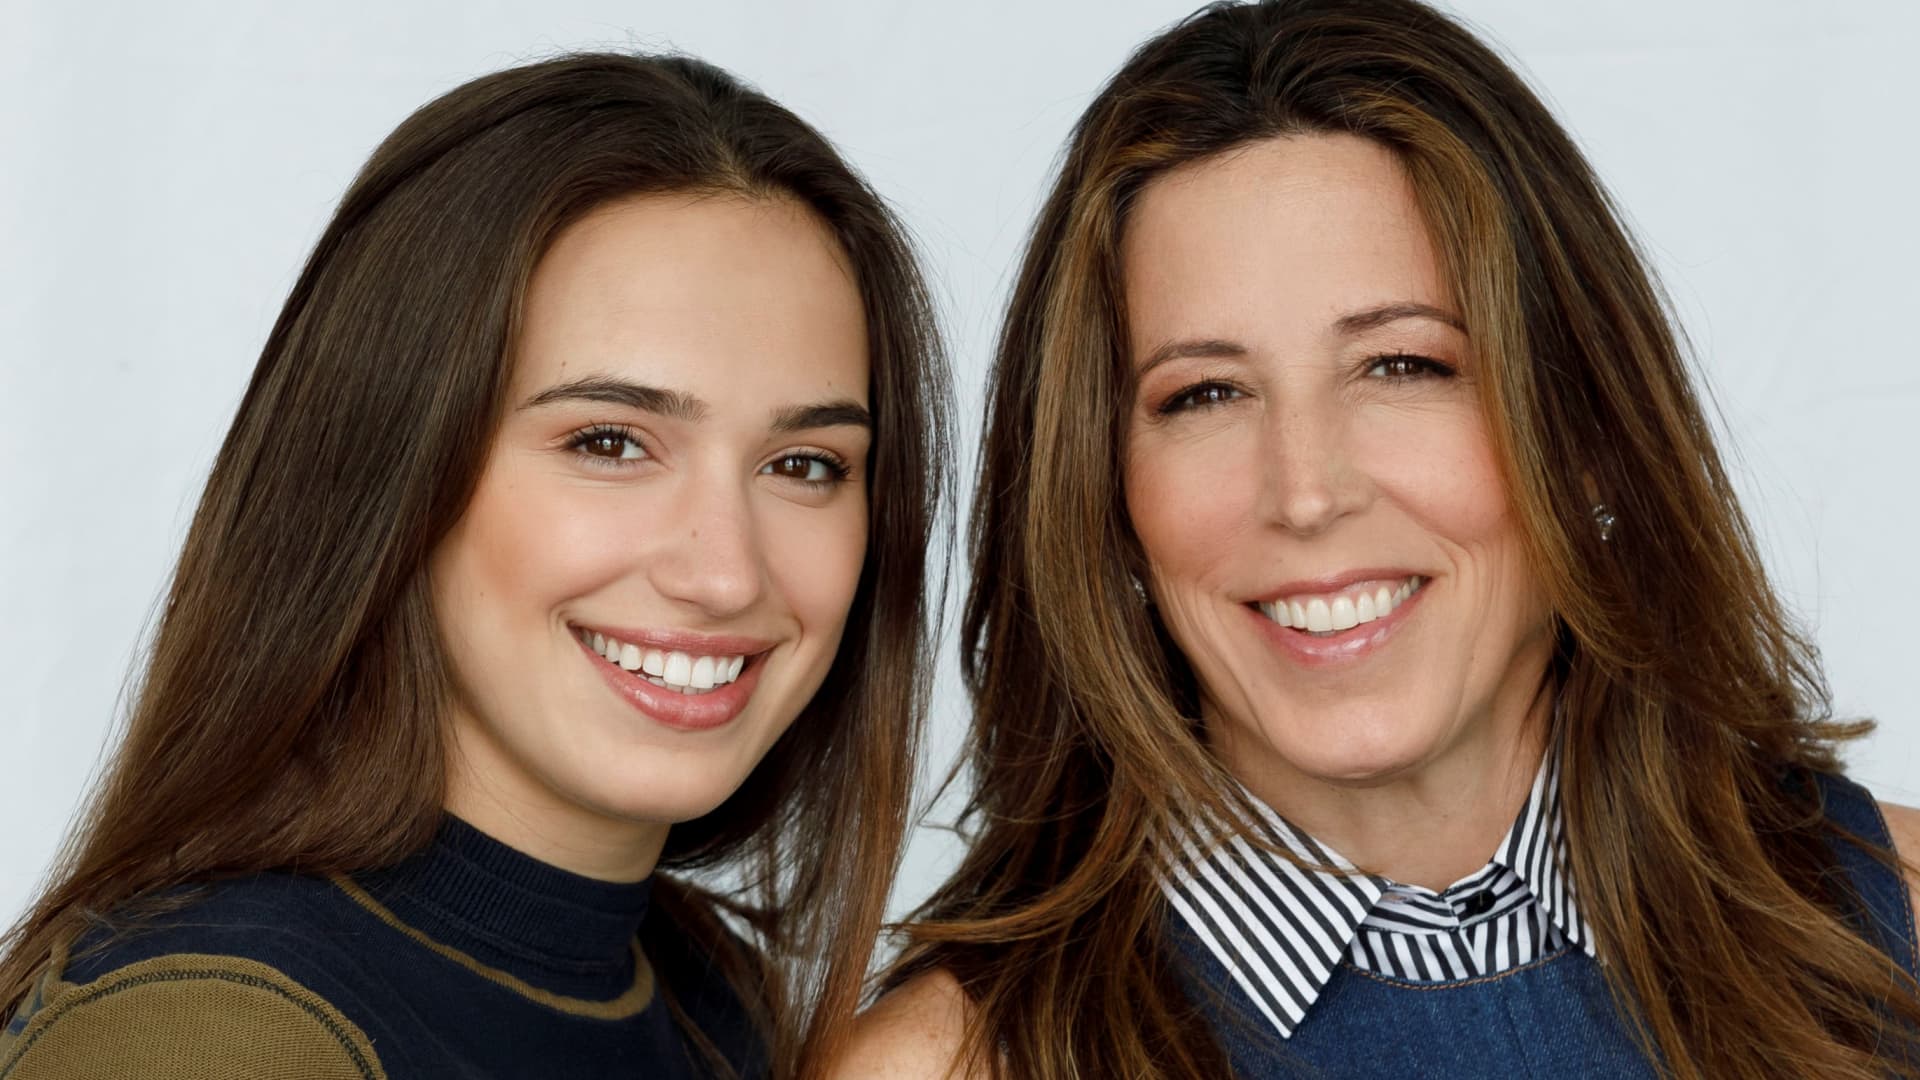 Jenny Just (right) launched Poker Power in 2020 with her teen daughter, Juliette (left).